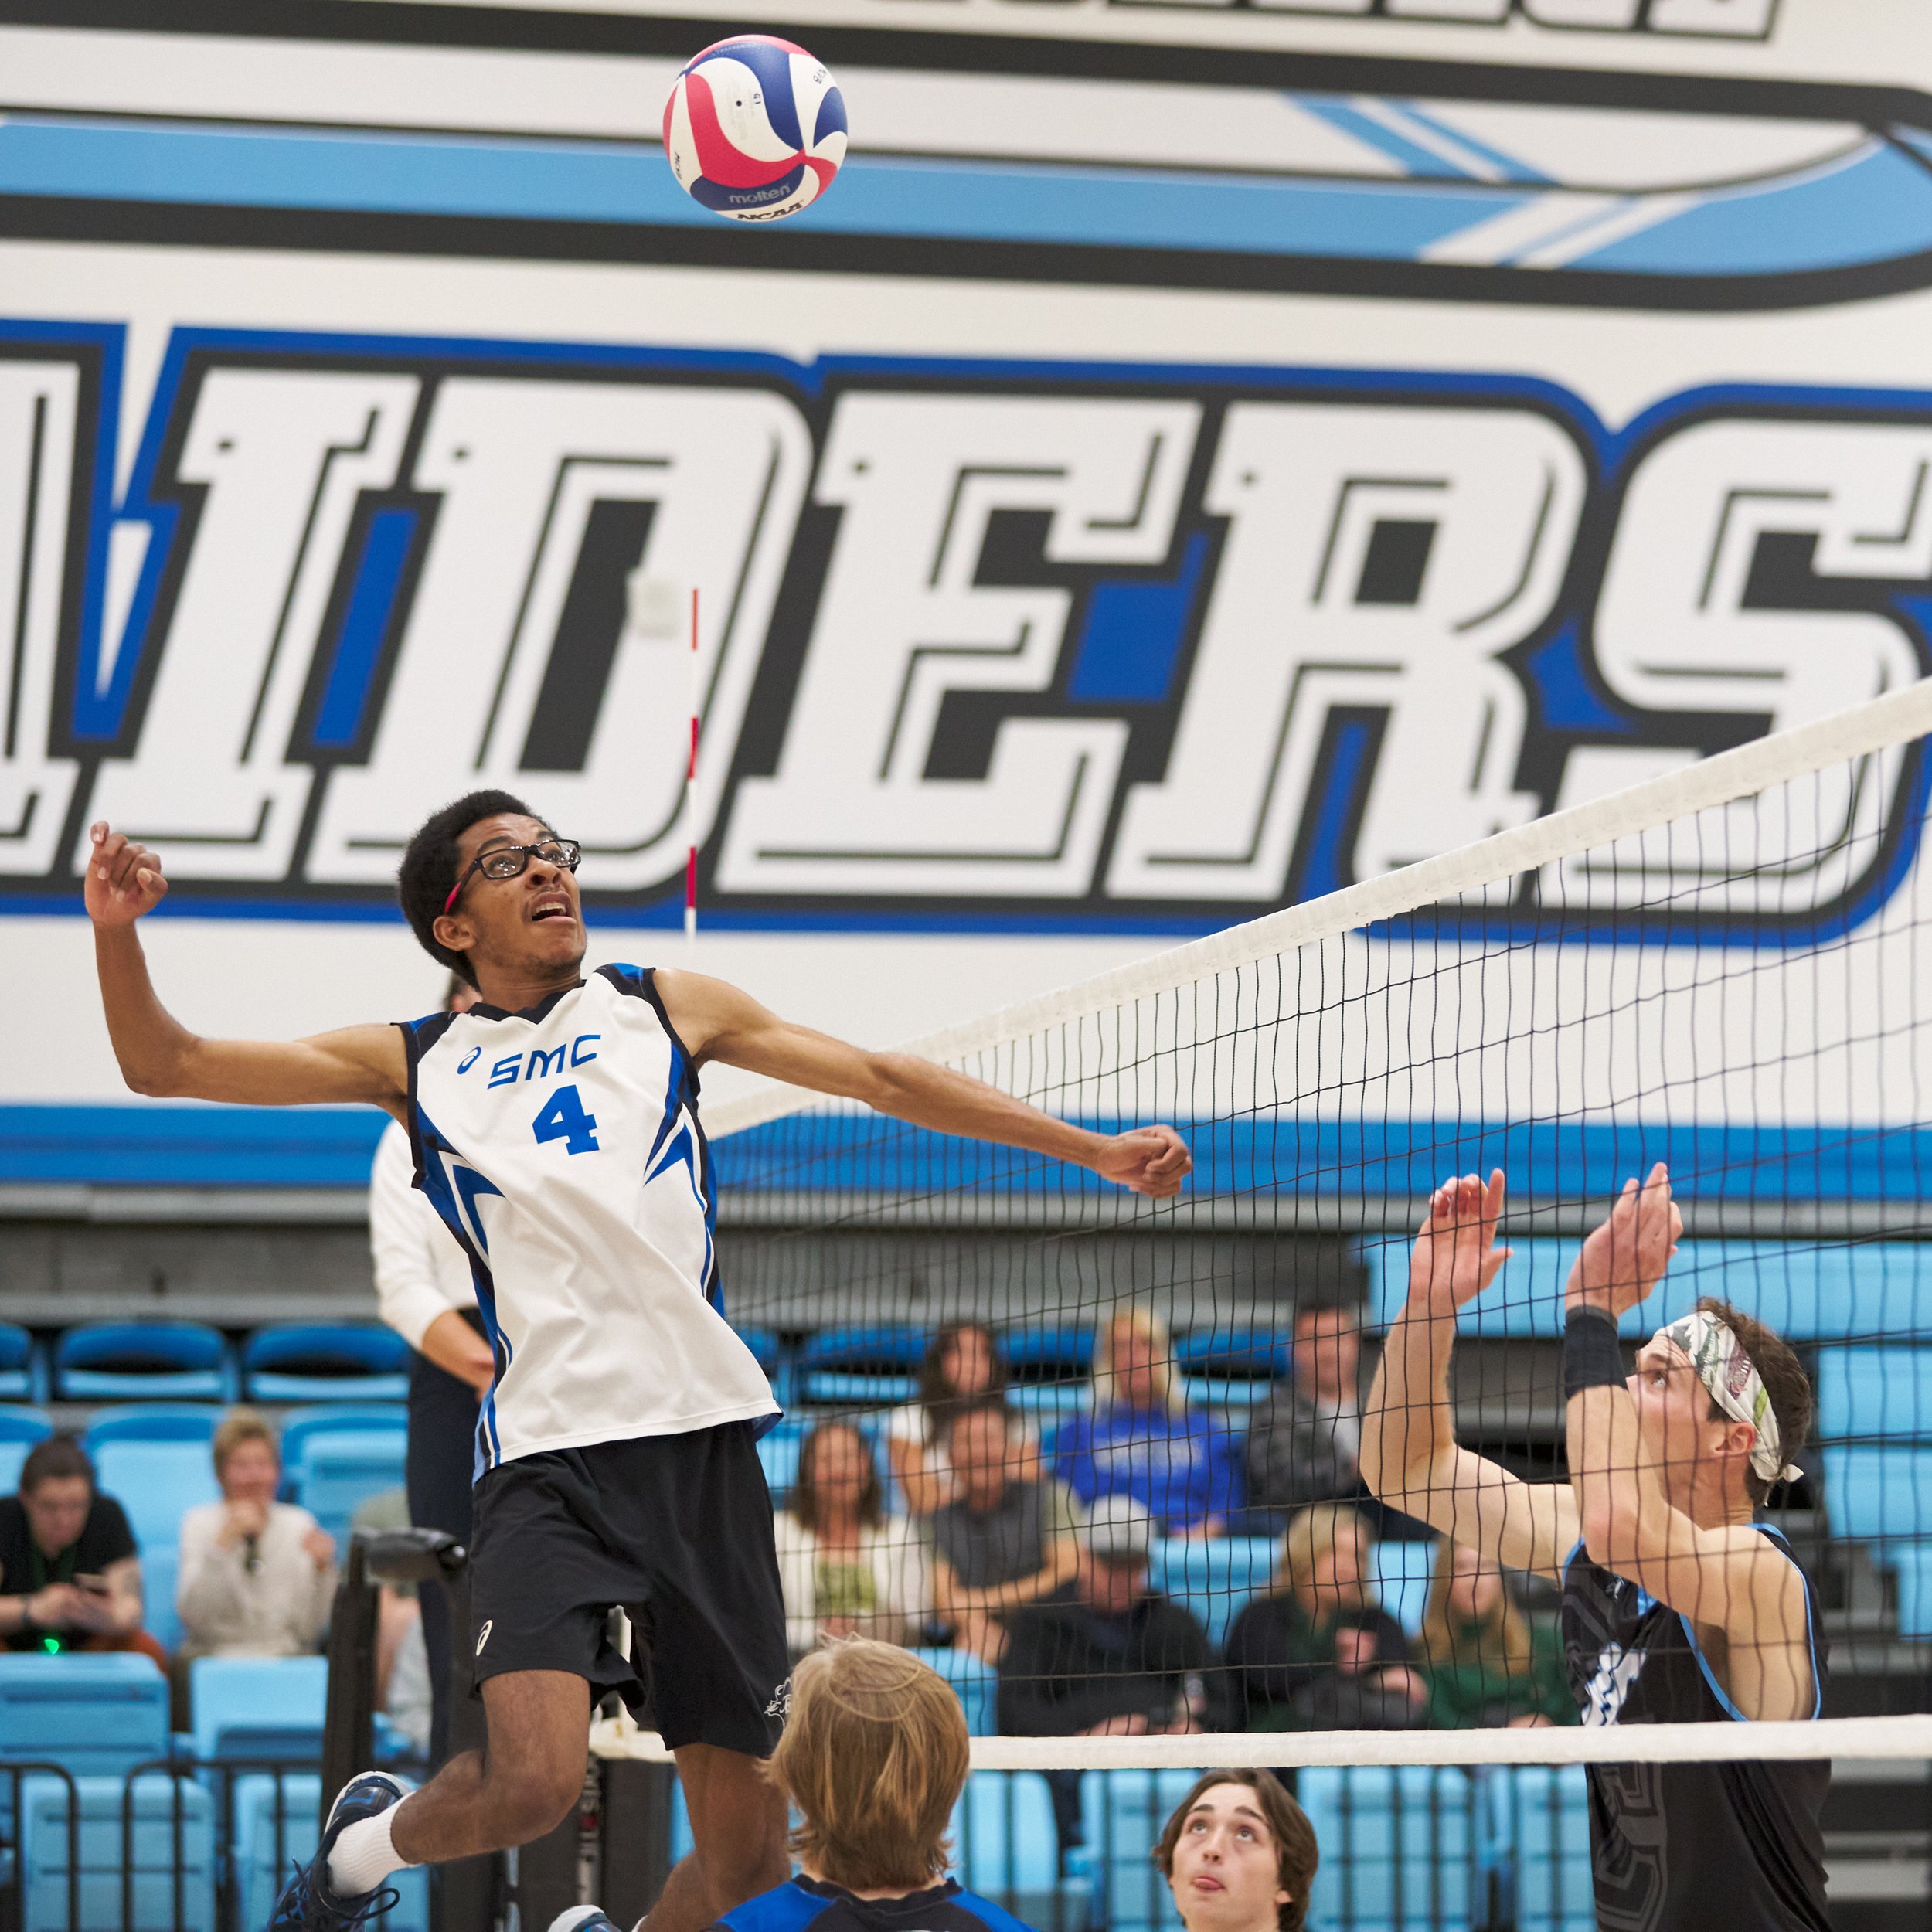  Santa Monica College Corsairs' Beikwaw Yankey winds up to hit the ball past Moorpark College Raiders' Sean Schmutz during the men's volleyball match on Friday, March 17, 2023, at Moorpark College's Gymnasium in Moorpark, Calif. The Corsairs lost 3-1